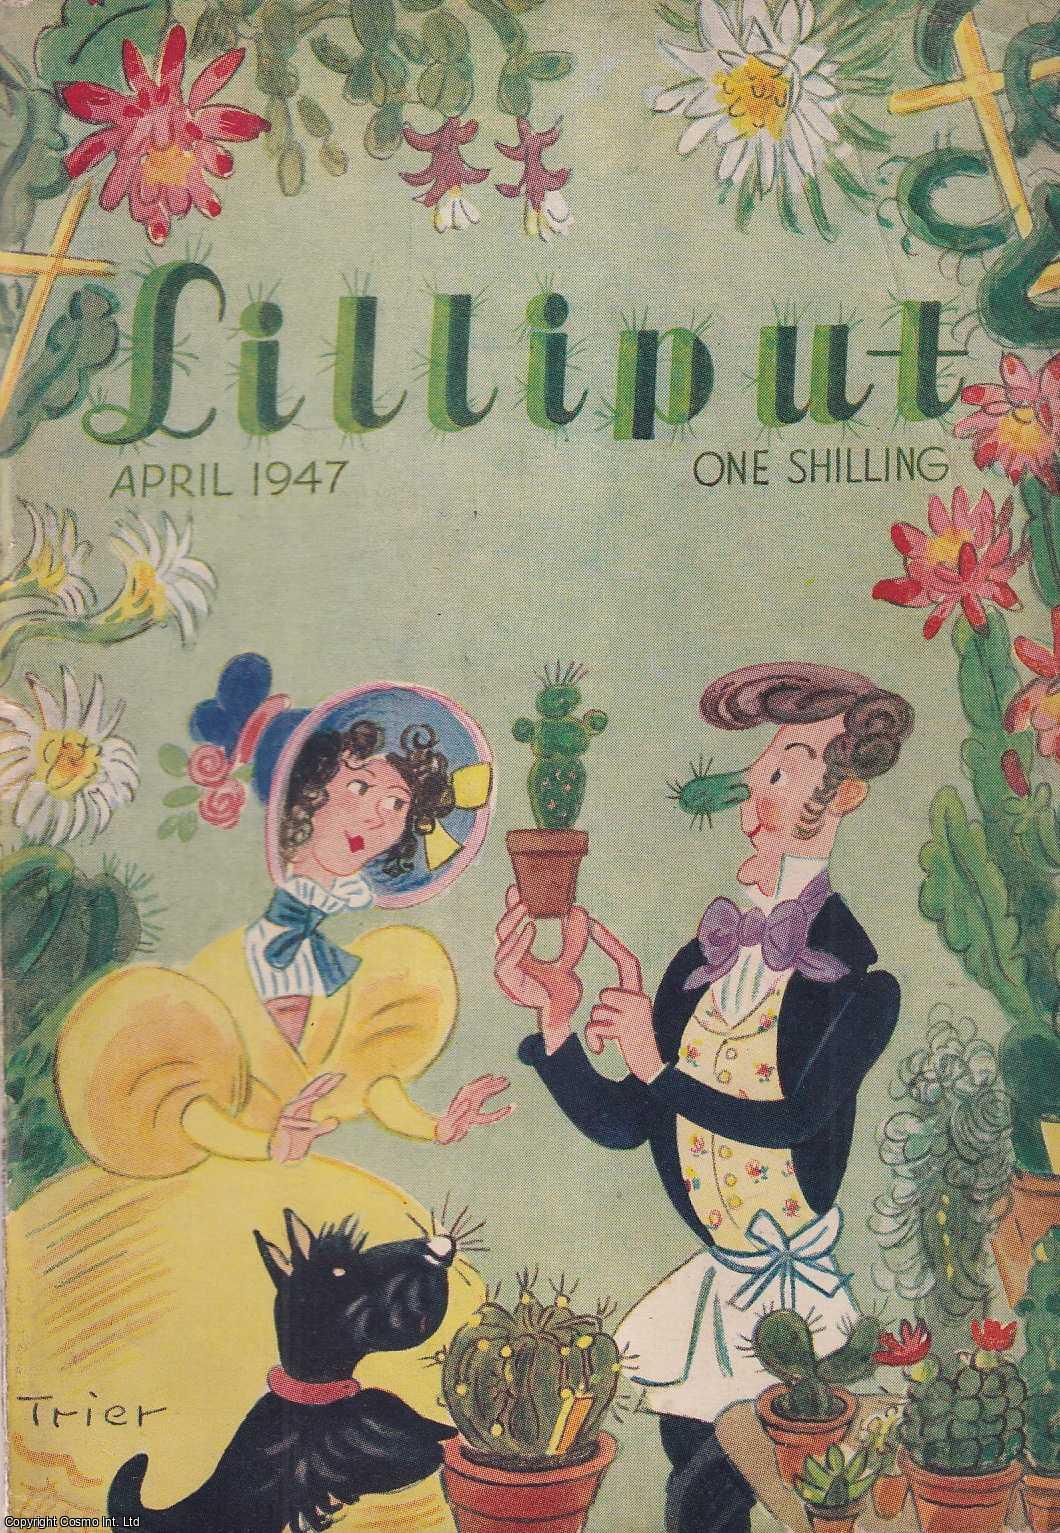 Lilliput - Lilliput Magazine. April 1947. Vol.20 no.4 Issue no.118. Eric Hobsbawn article, with colour illustrations by James Boswell, and other pieces.